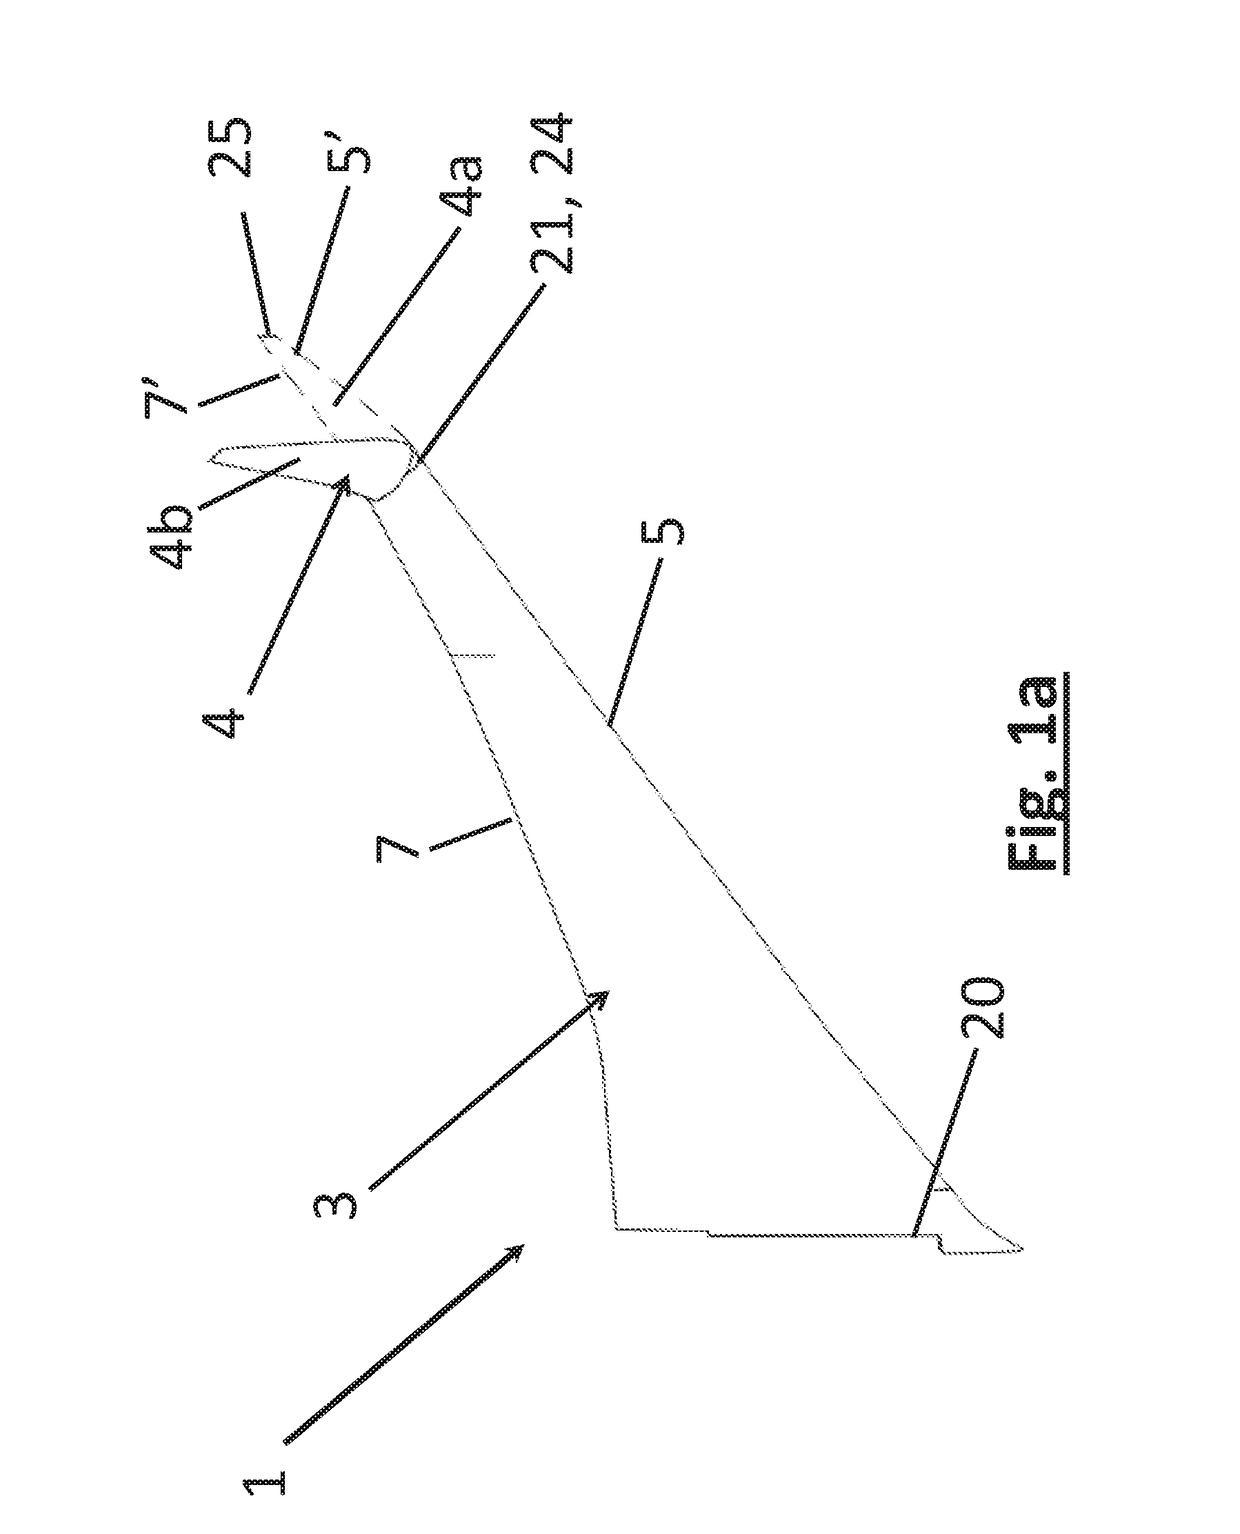 Rotational joint for an aircraft folding wing